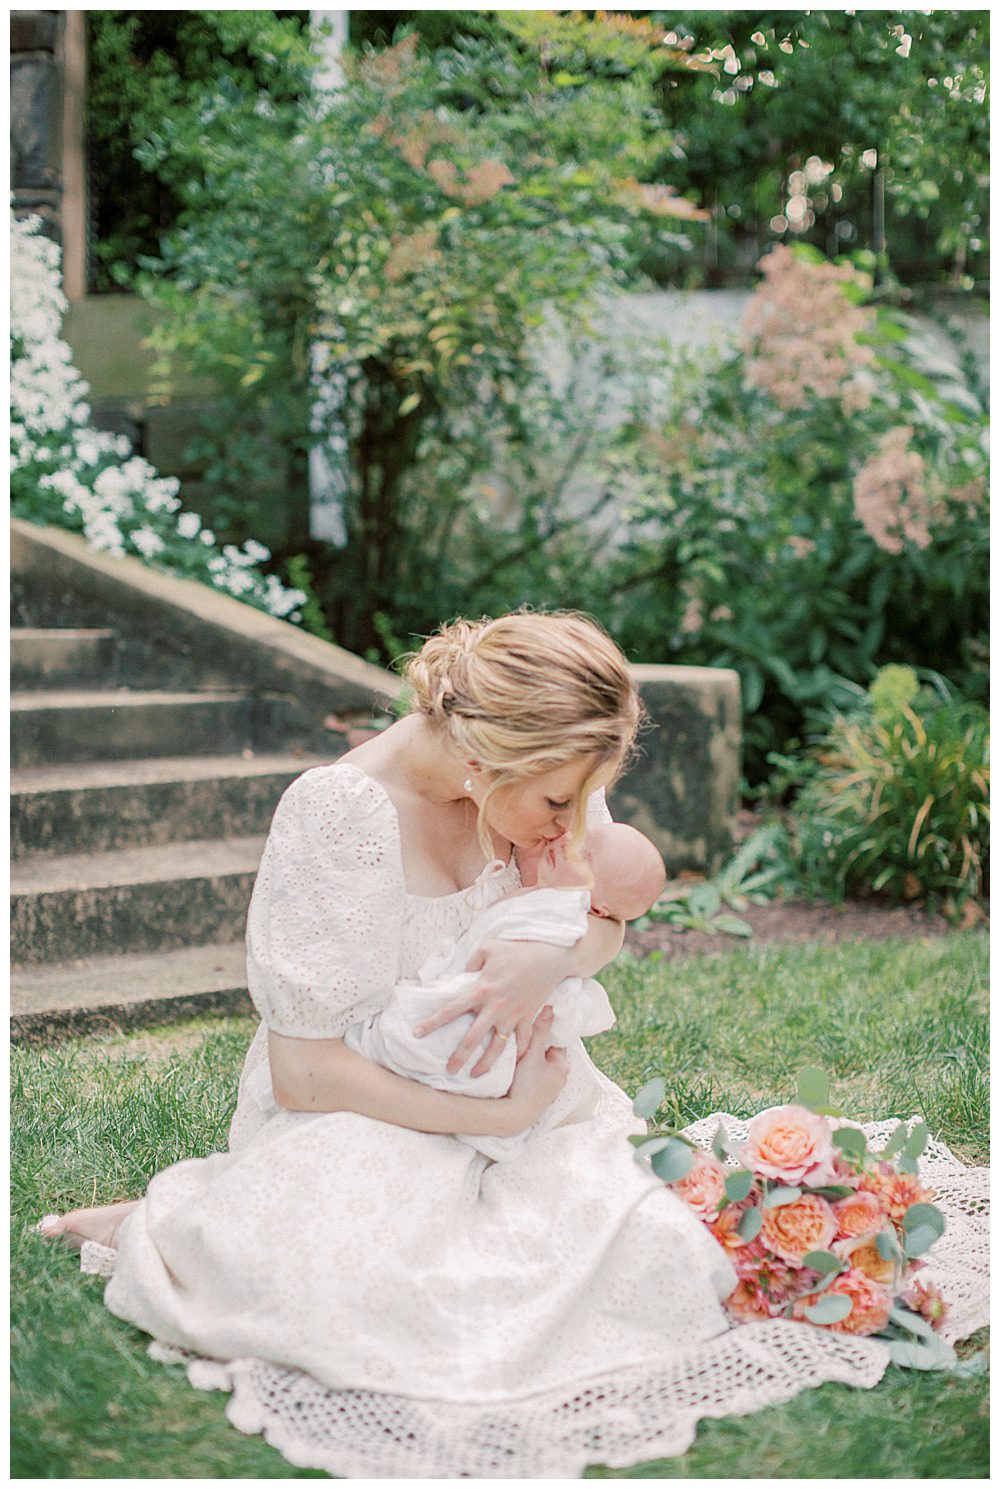 Blonde new mother holds newborn daughter while sitting on crochet blanket during outdoor Alexandria VA newborn session.